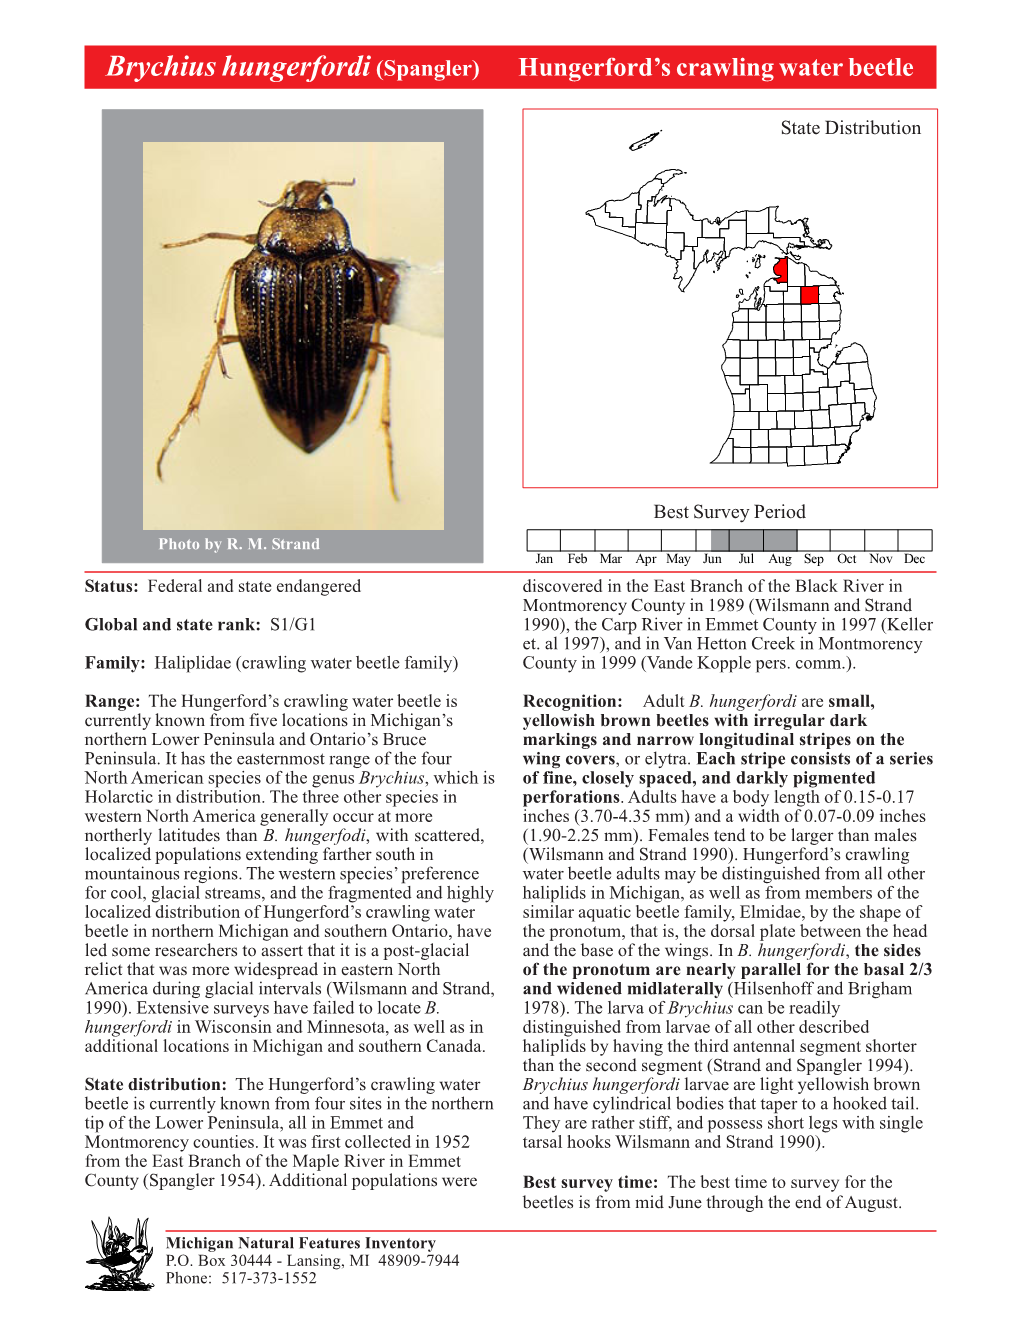 Brychius Hungerfordi (Spangler) Hungerford’S Crawling Water Beetle